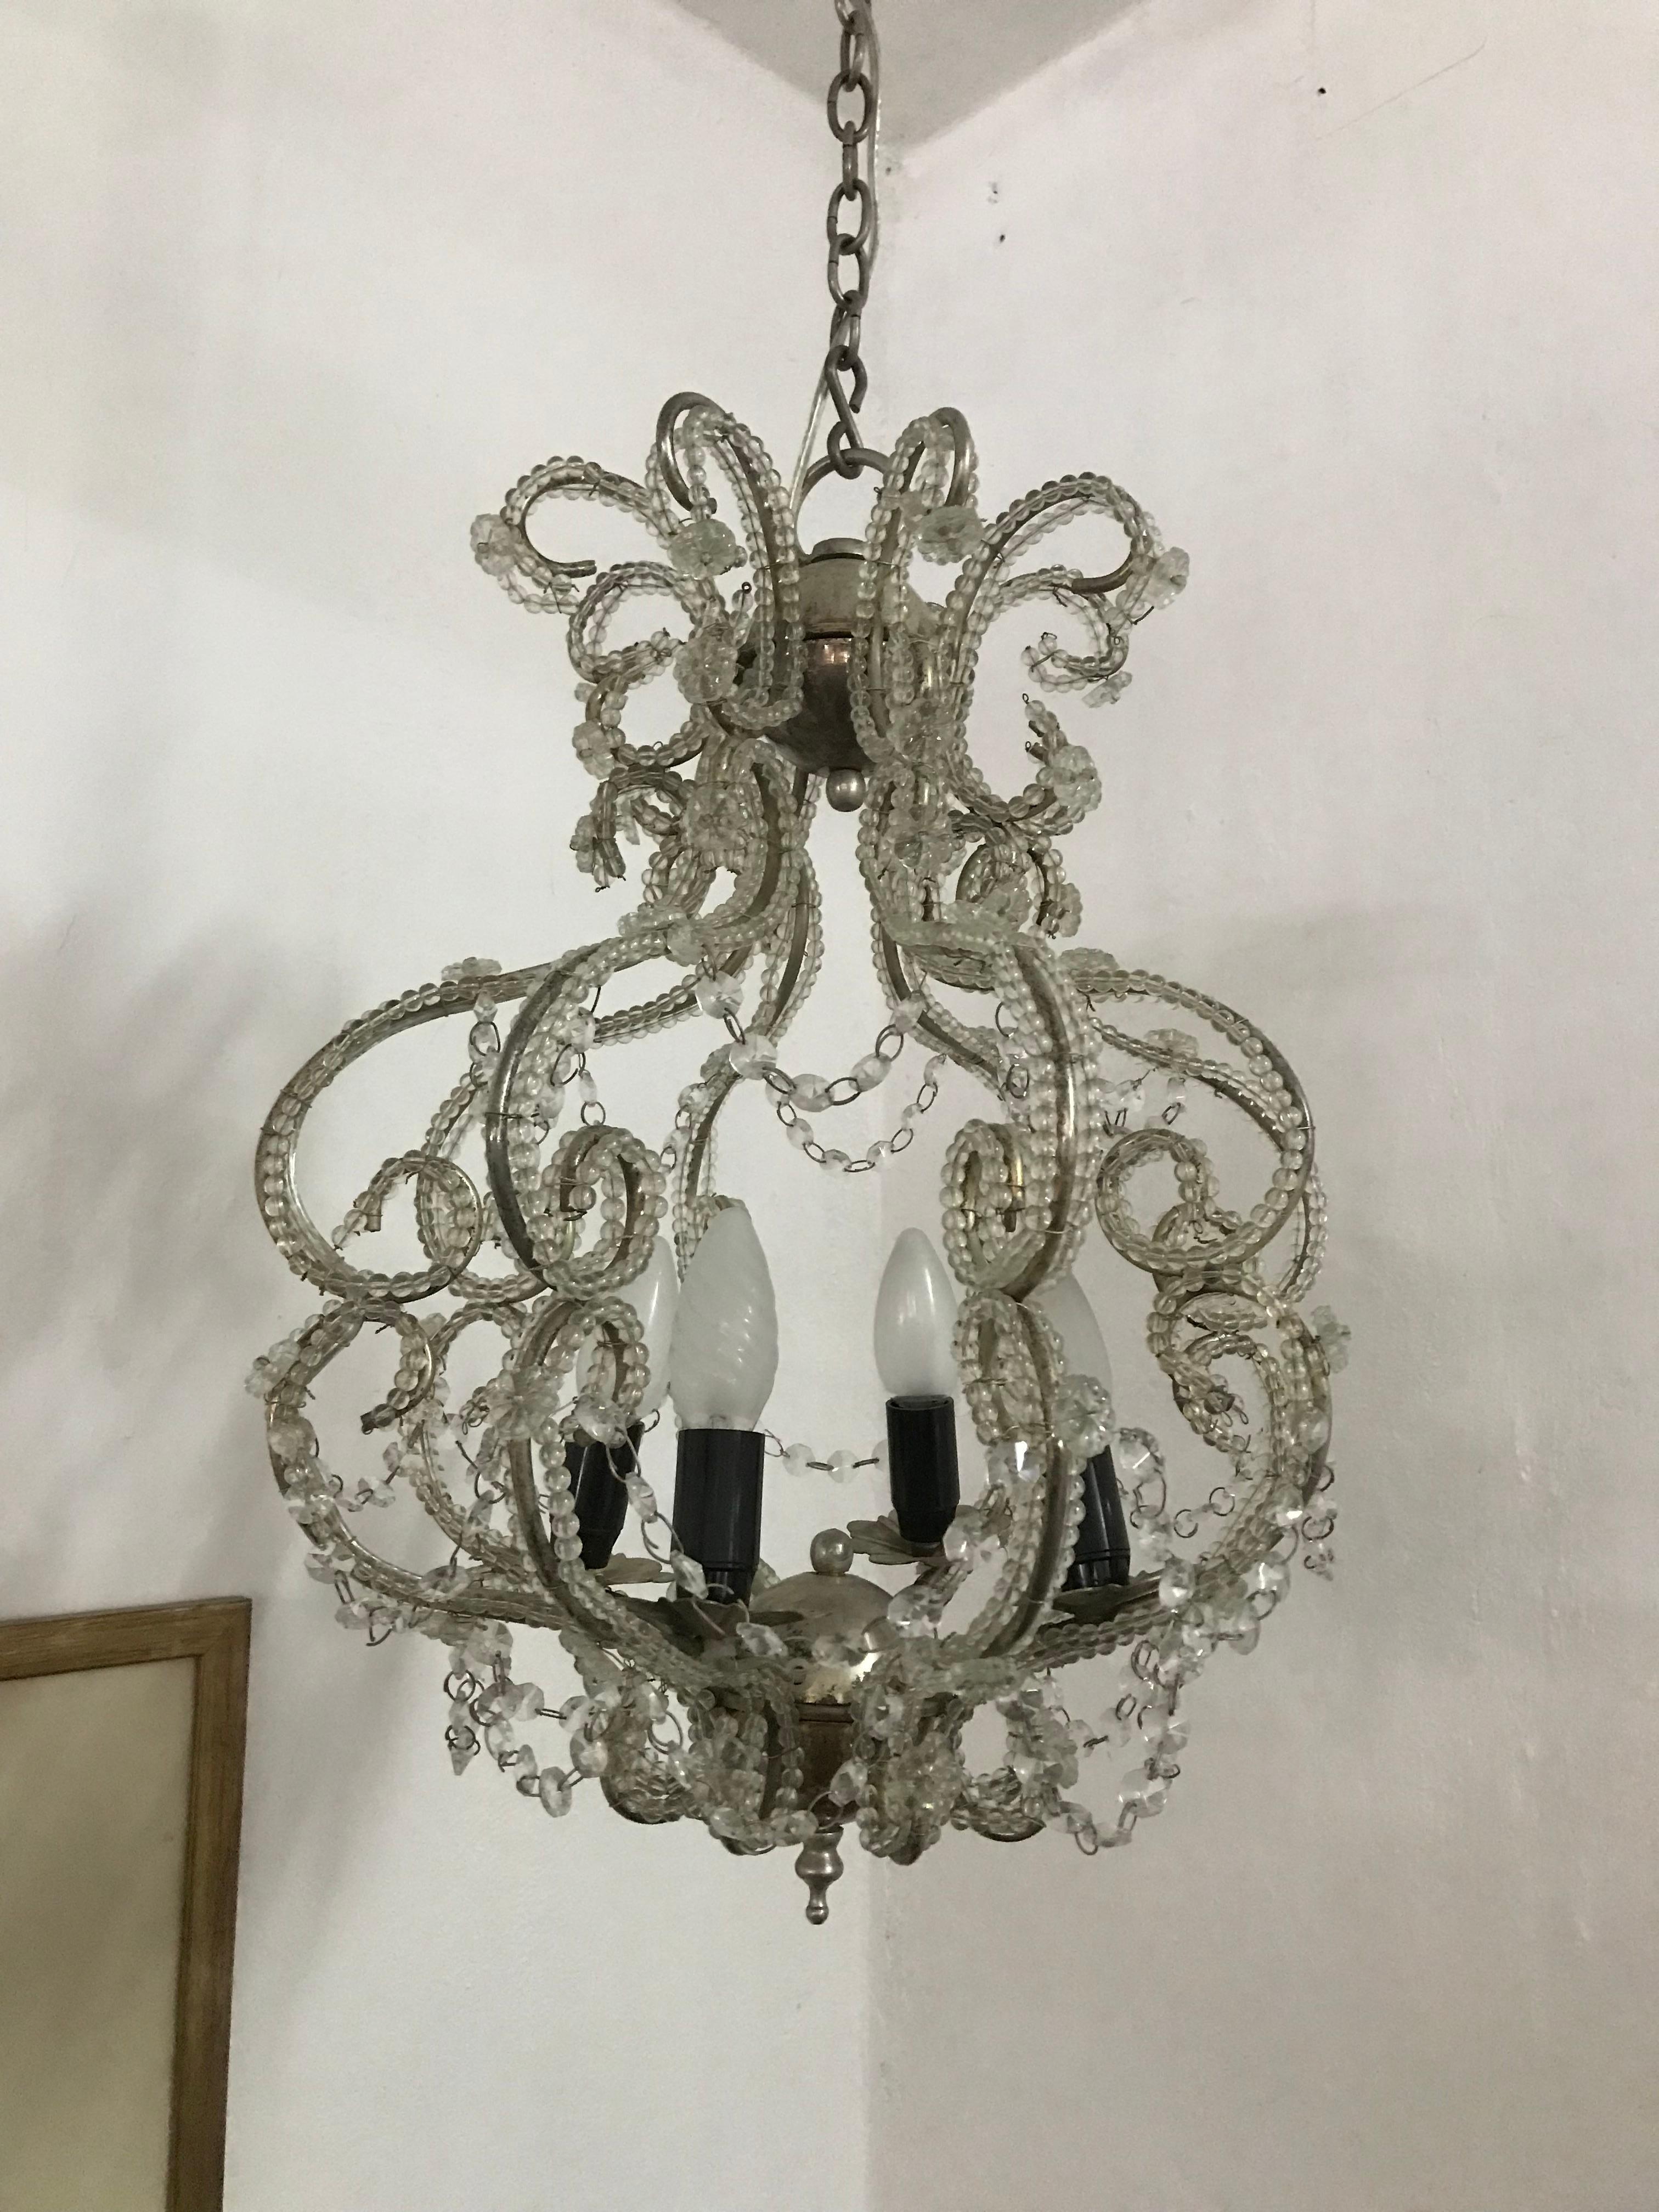 French chandelier, in silver gilt steel, beaded throughout all the metal work with cut glass beads. Made in France, circa 1960.